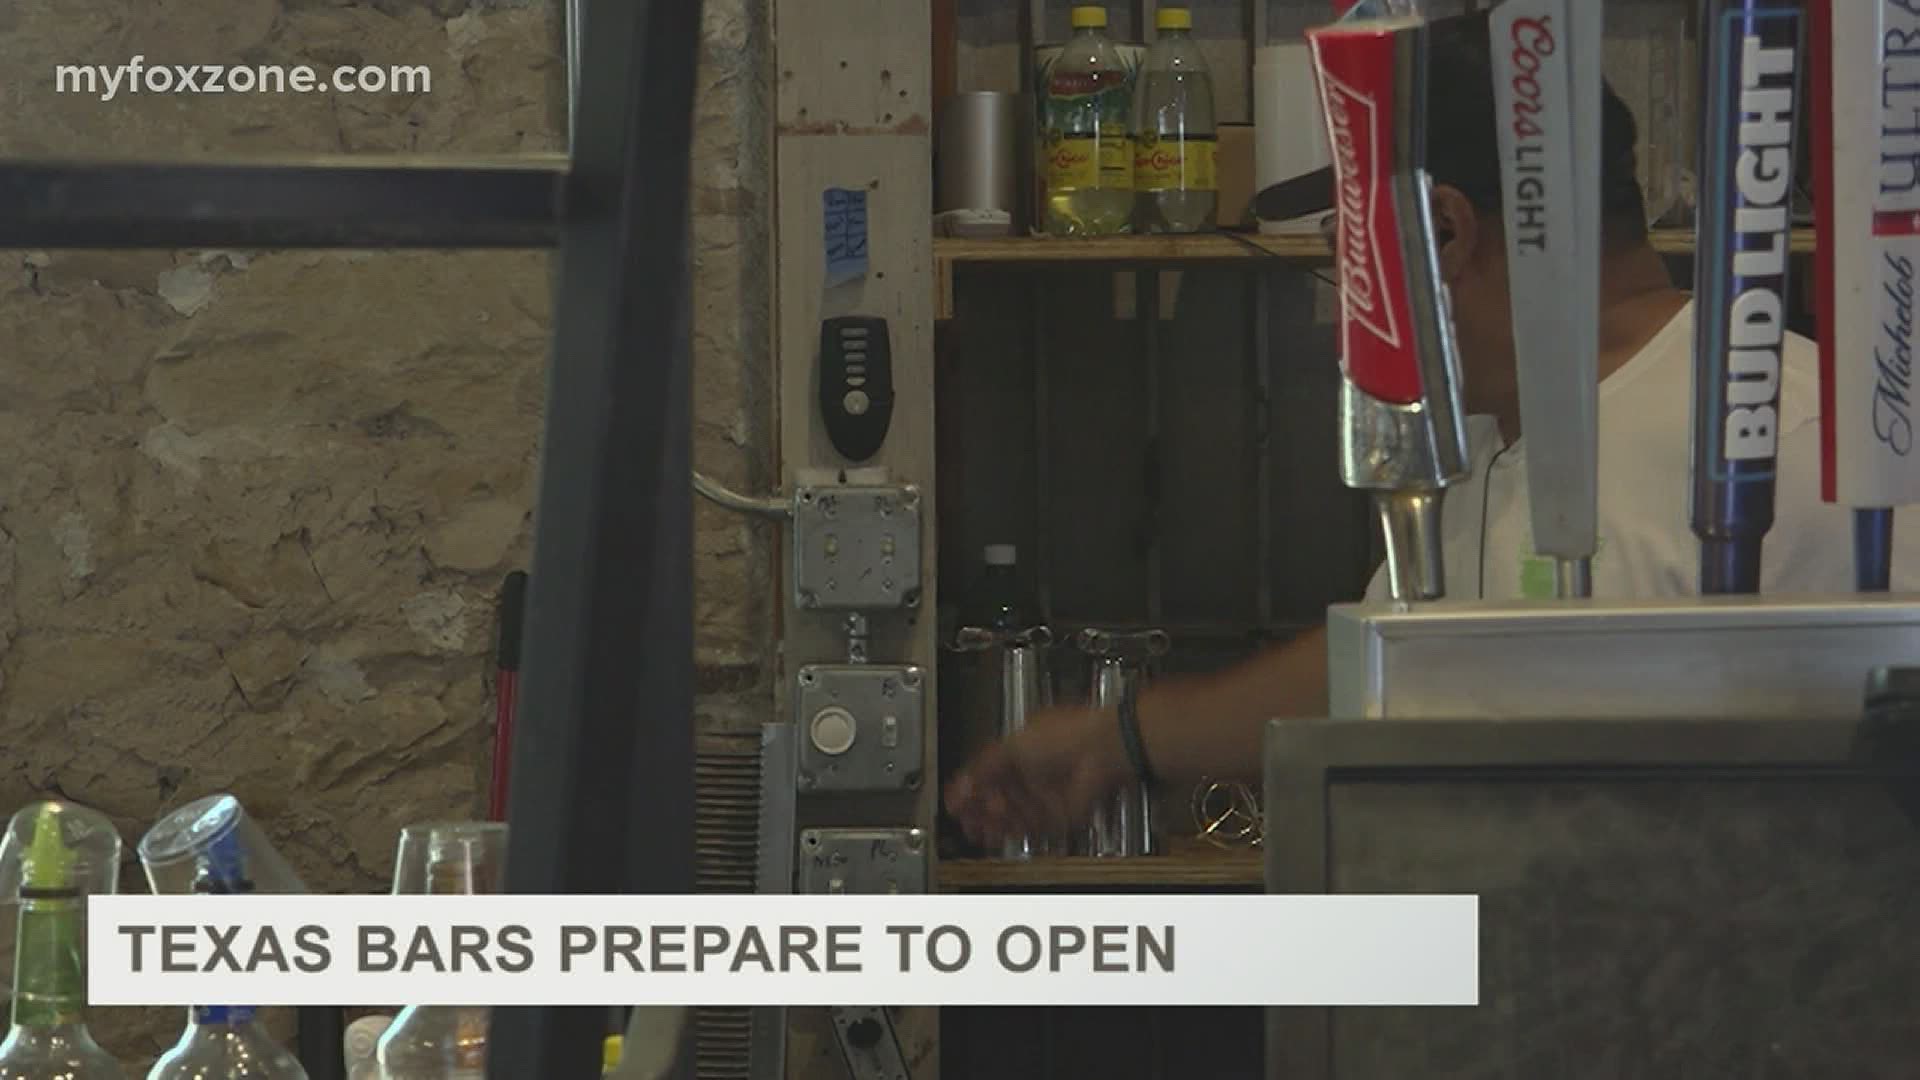 West Texas bars preparing to reopen.